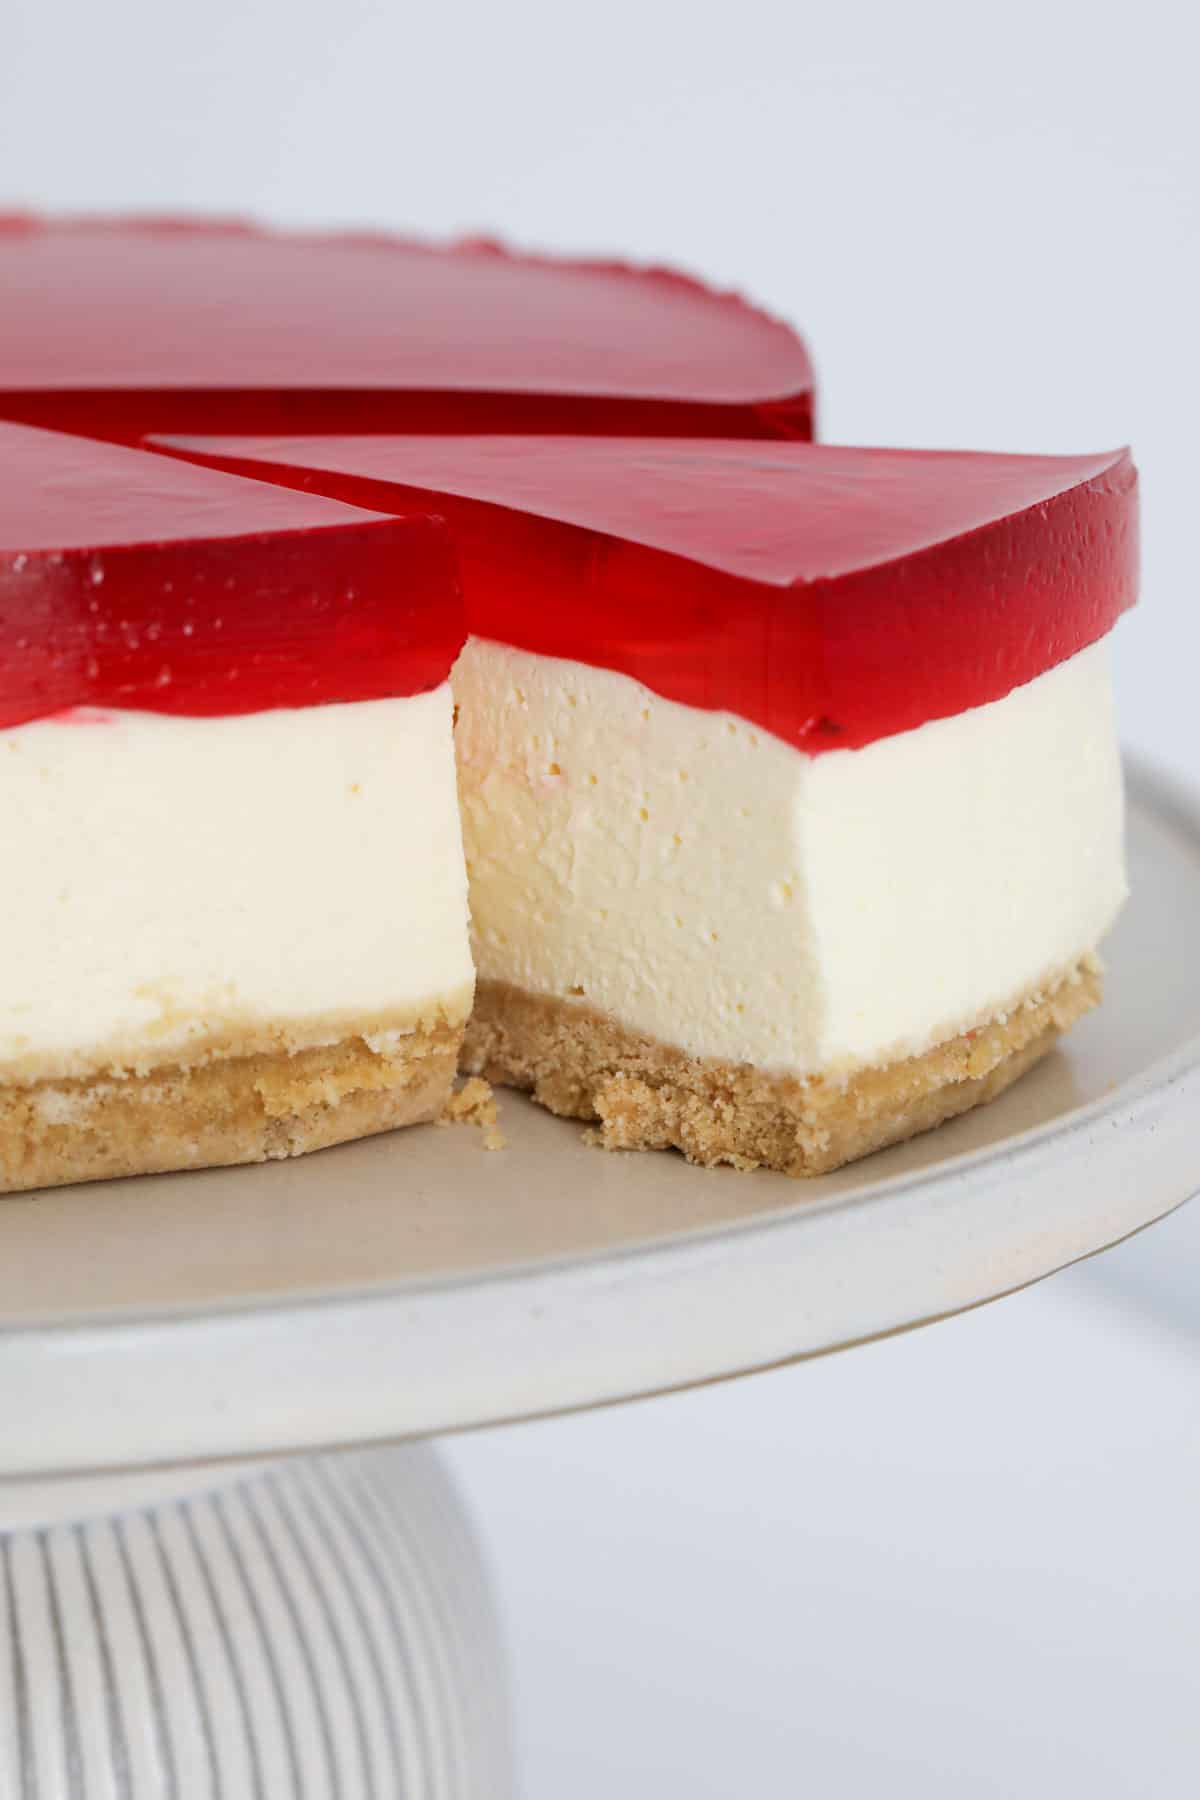 Side view of the jelly cheesecake with a slice taken out to show the layers of the cheesecake.